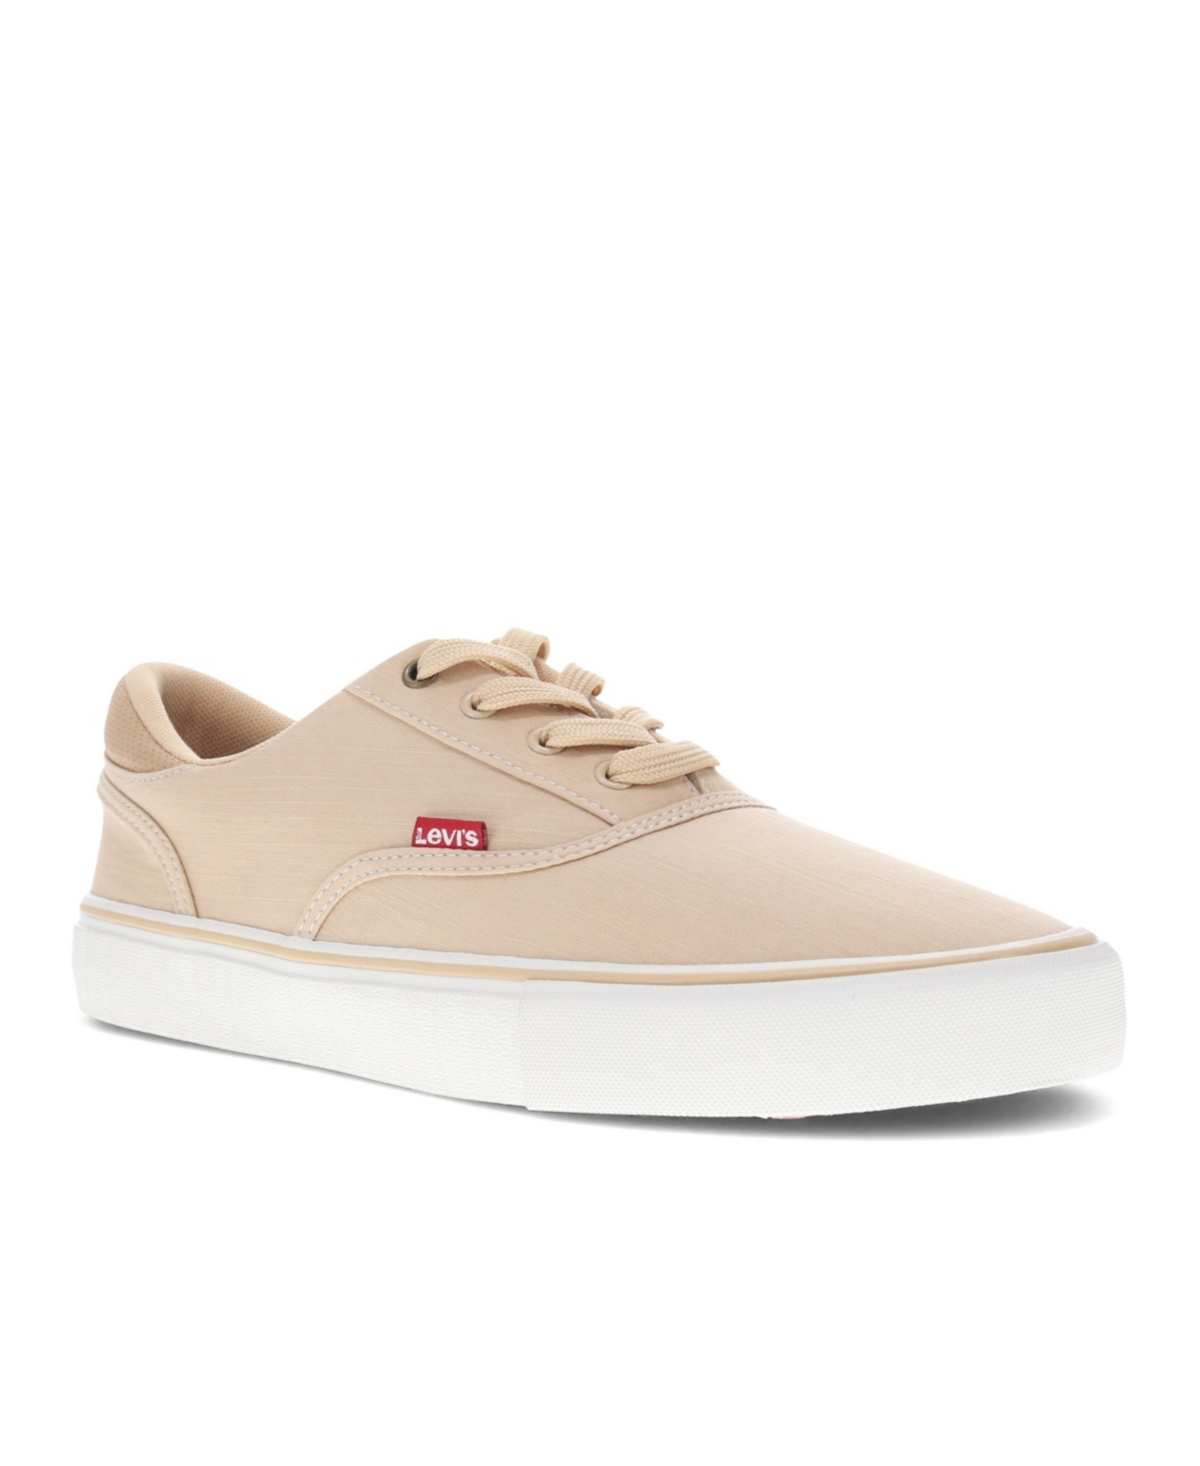 Levi's Men's Ethan S Chambray Lace-up Sneakers In Khaki